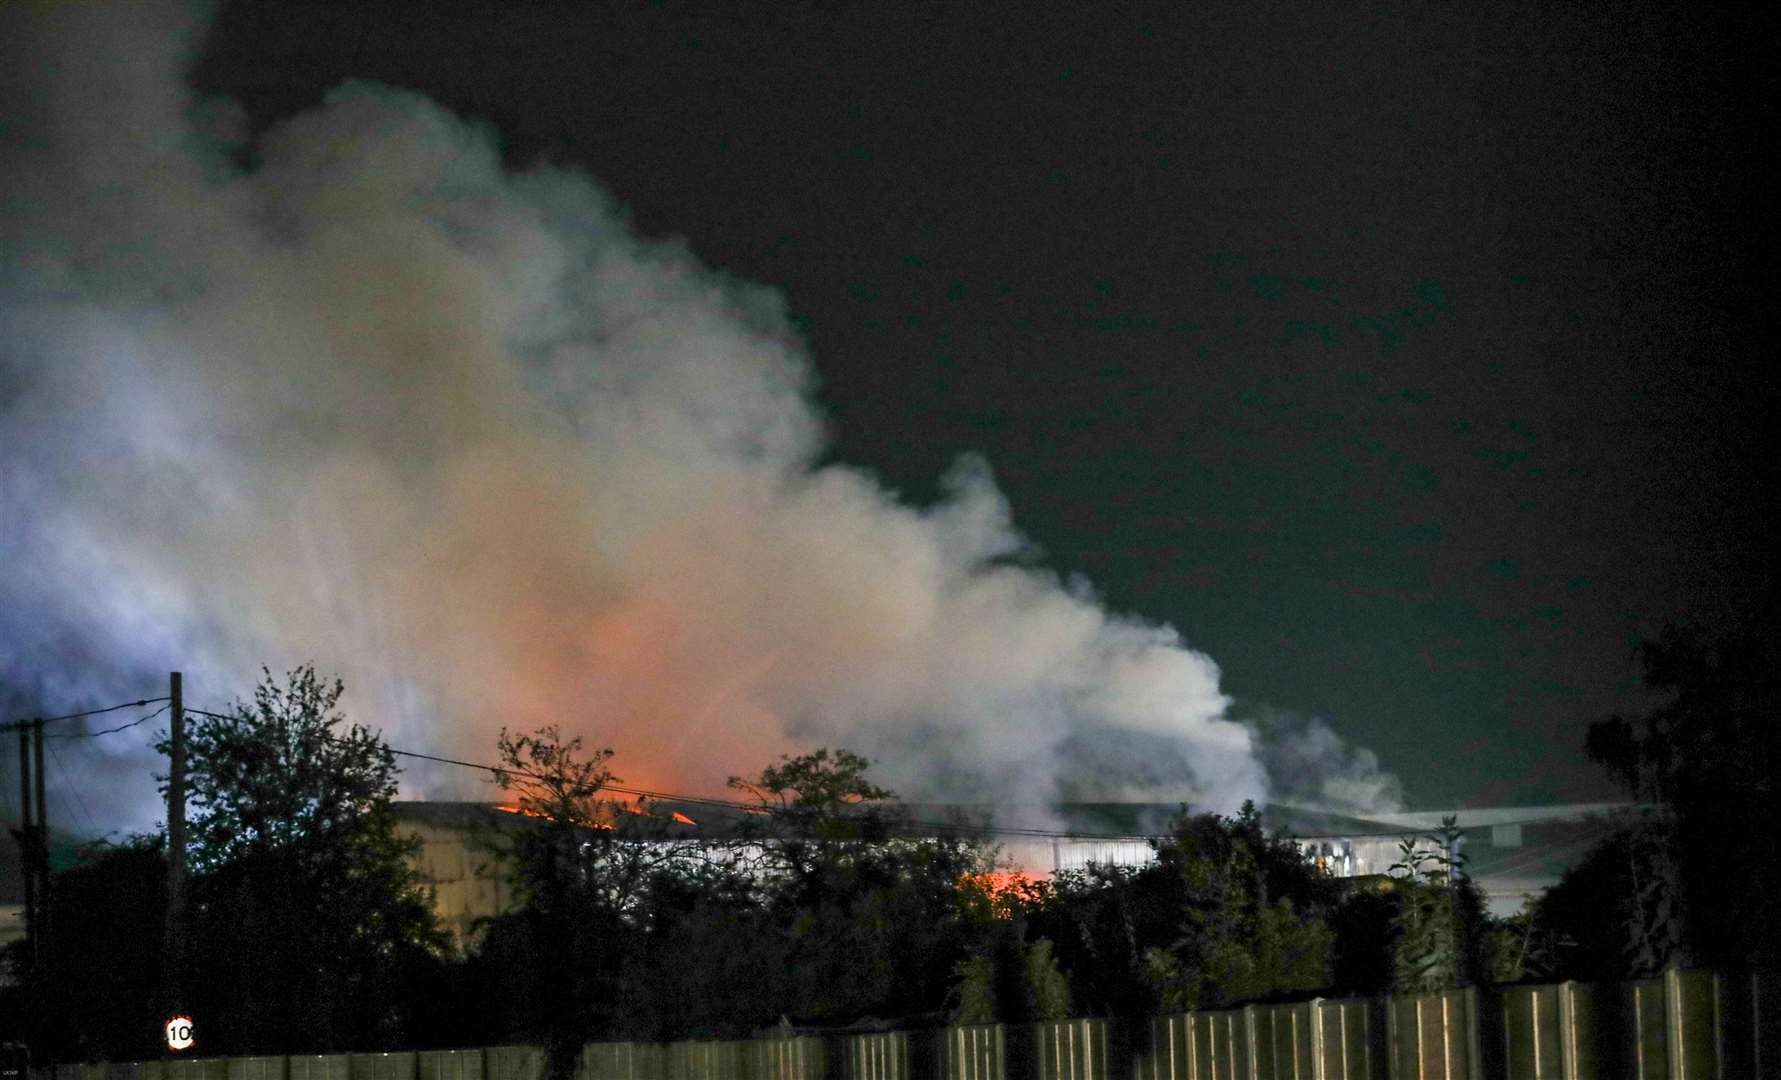 The fire at the Eurolink industrial estate in Sittingbourne. Picture: UKNIP (51636166)